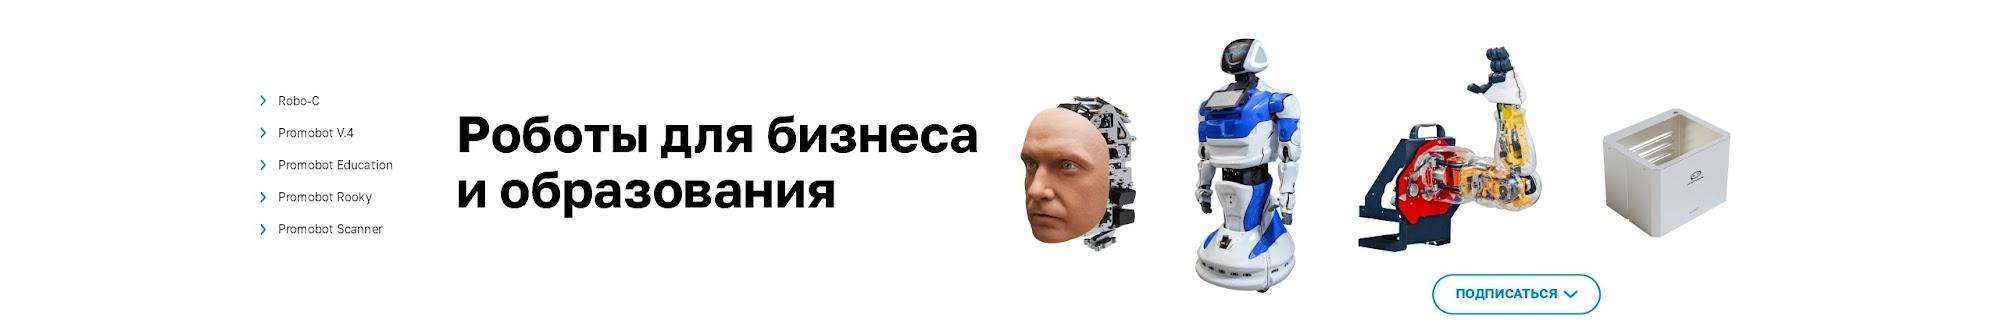 Promobot Russia